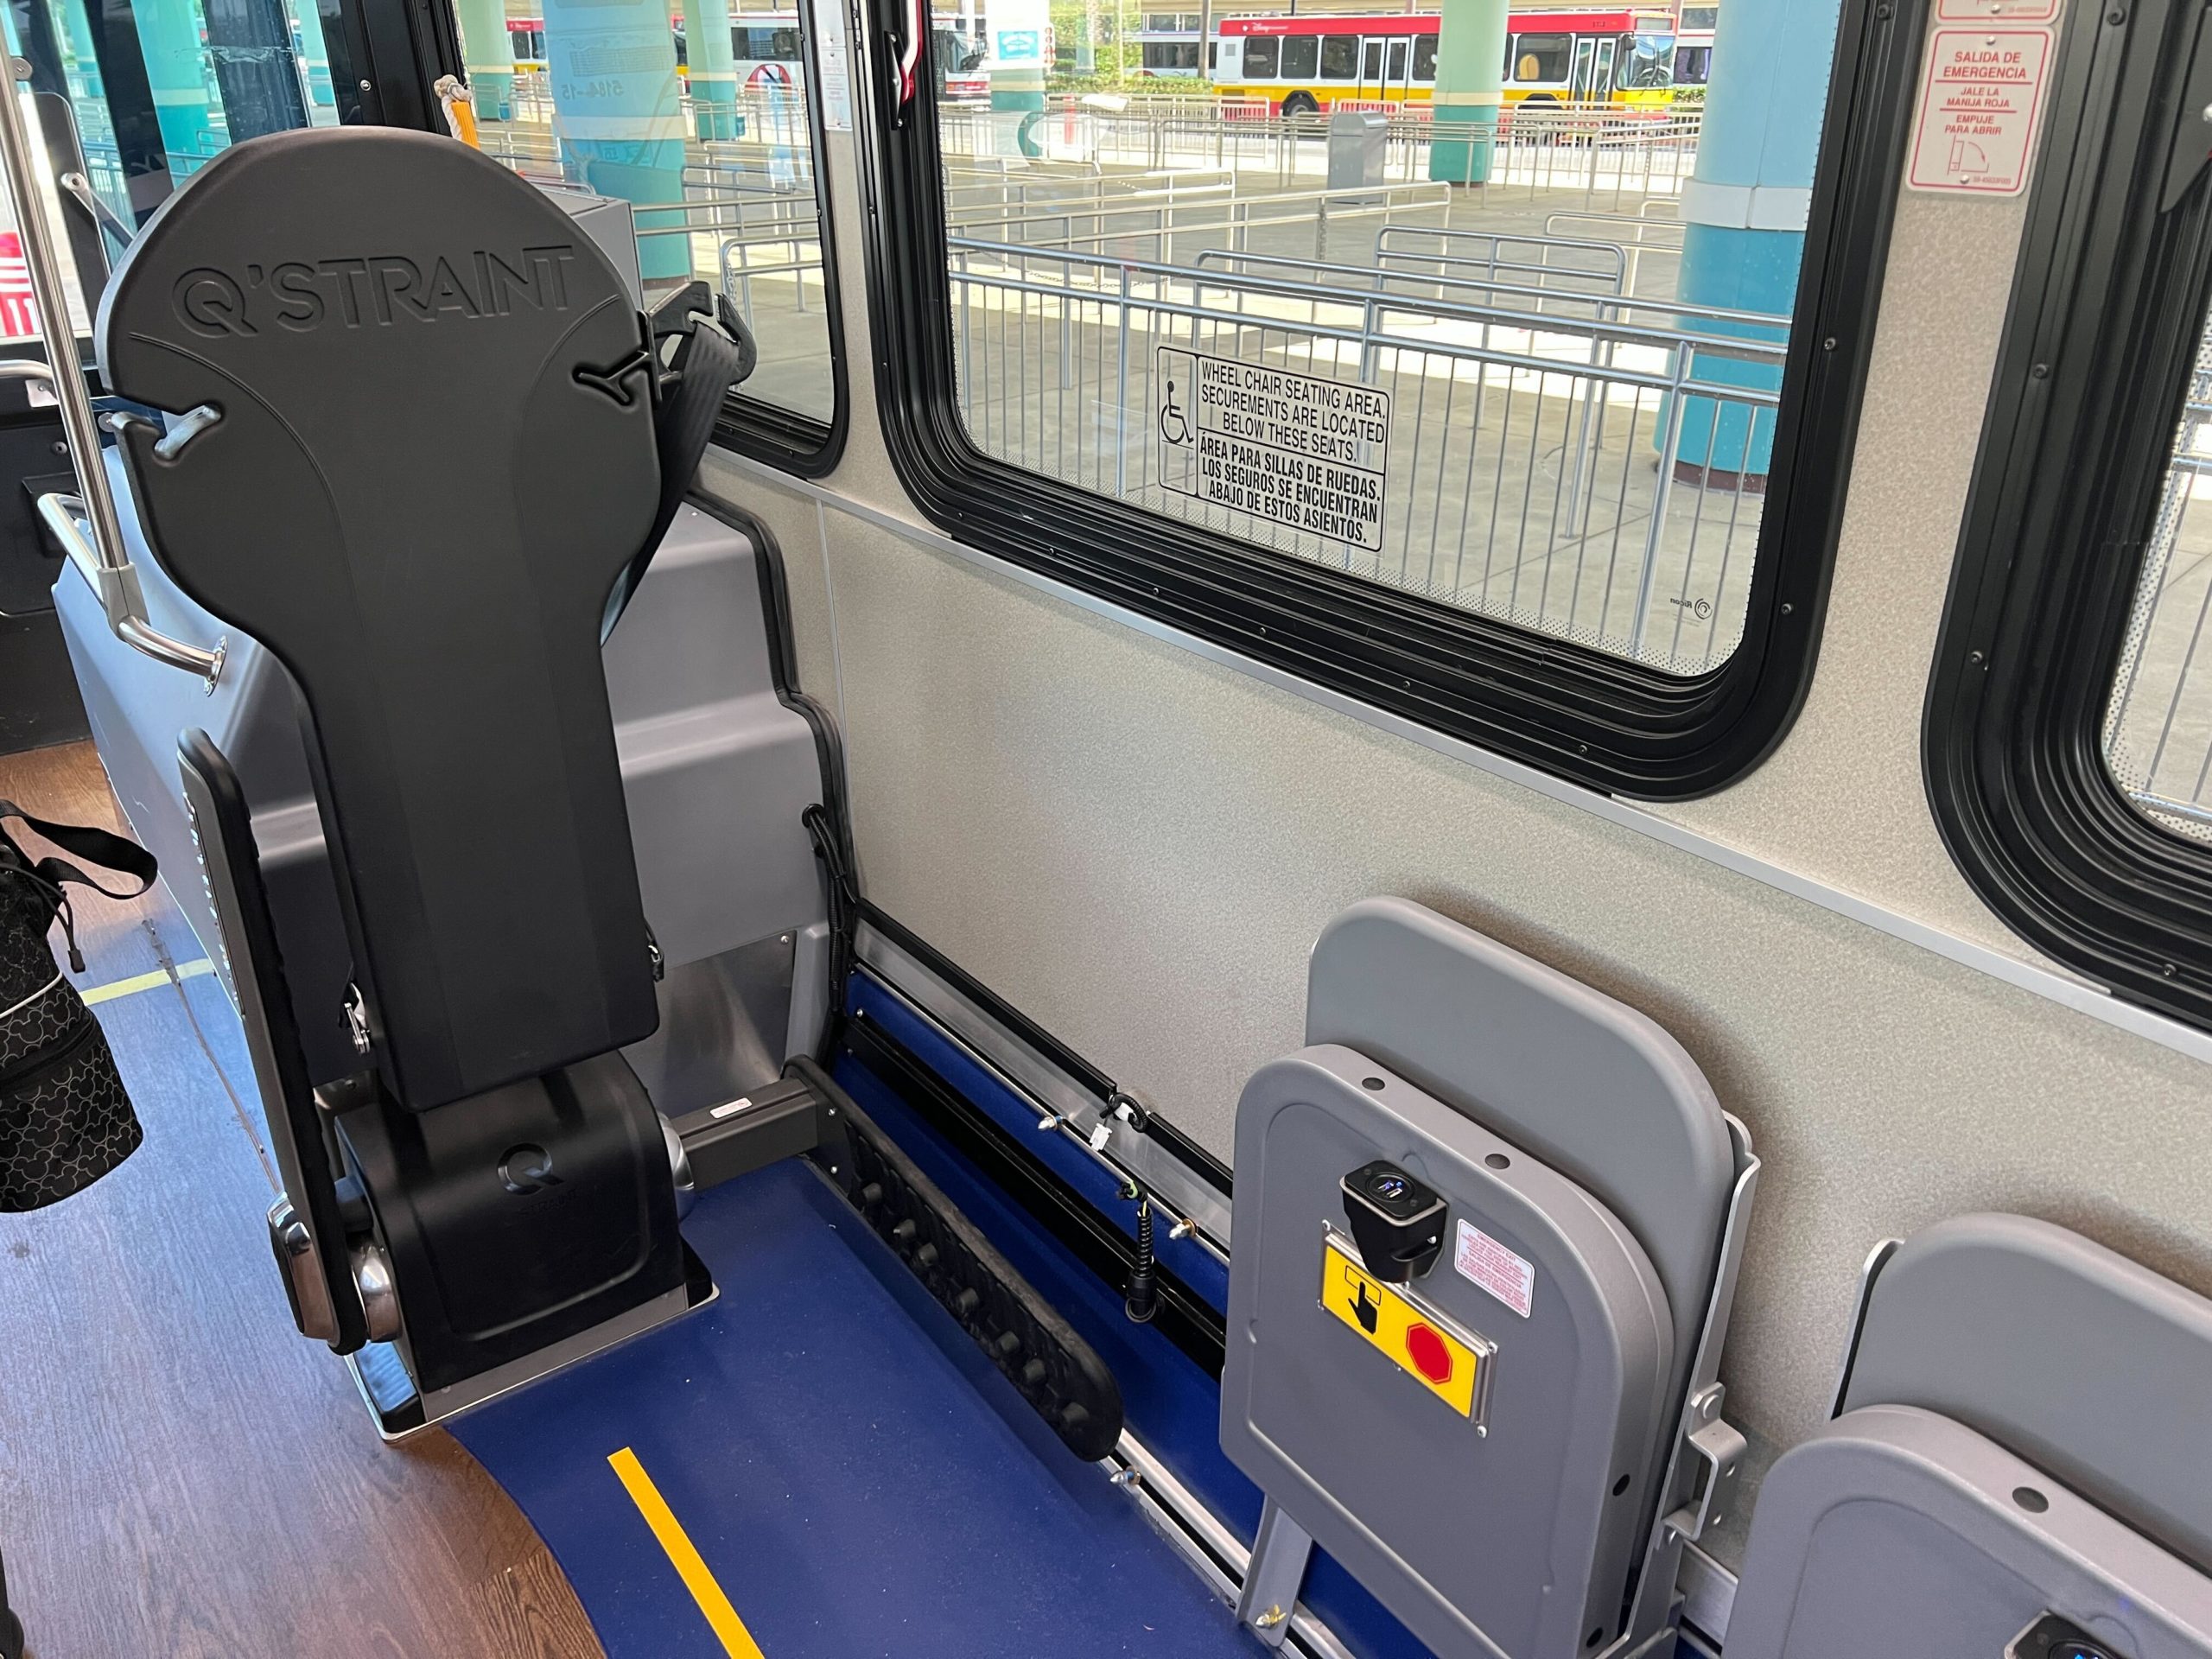 wdw transport refurbished bus accessible